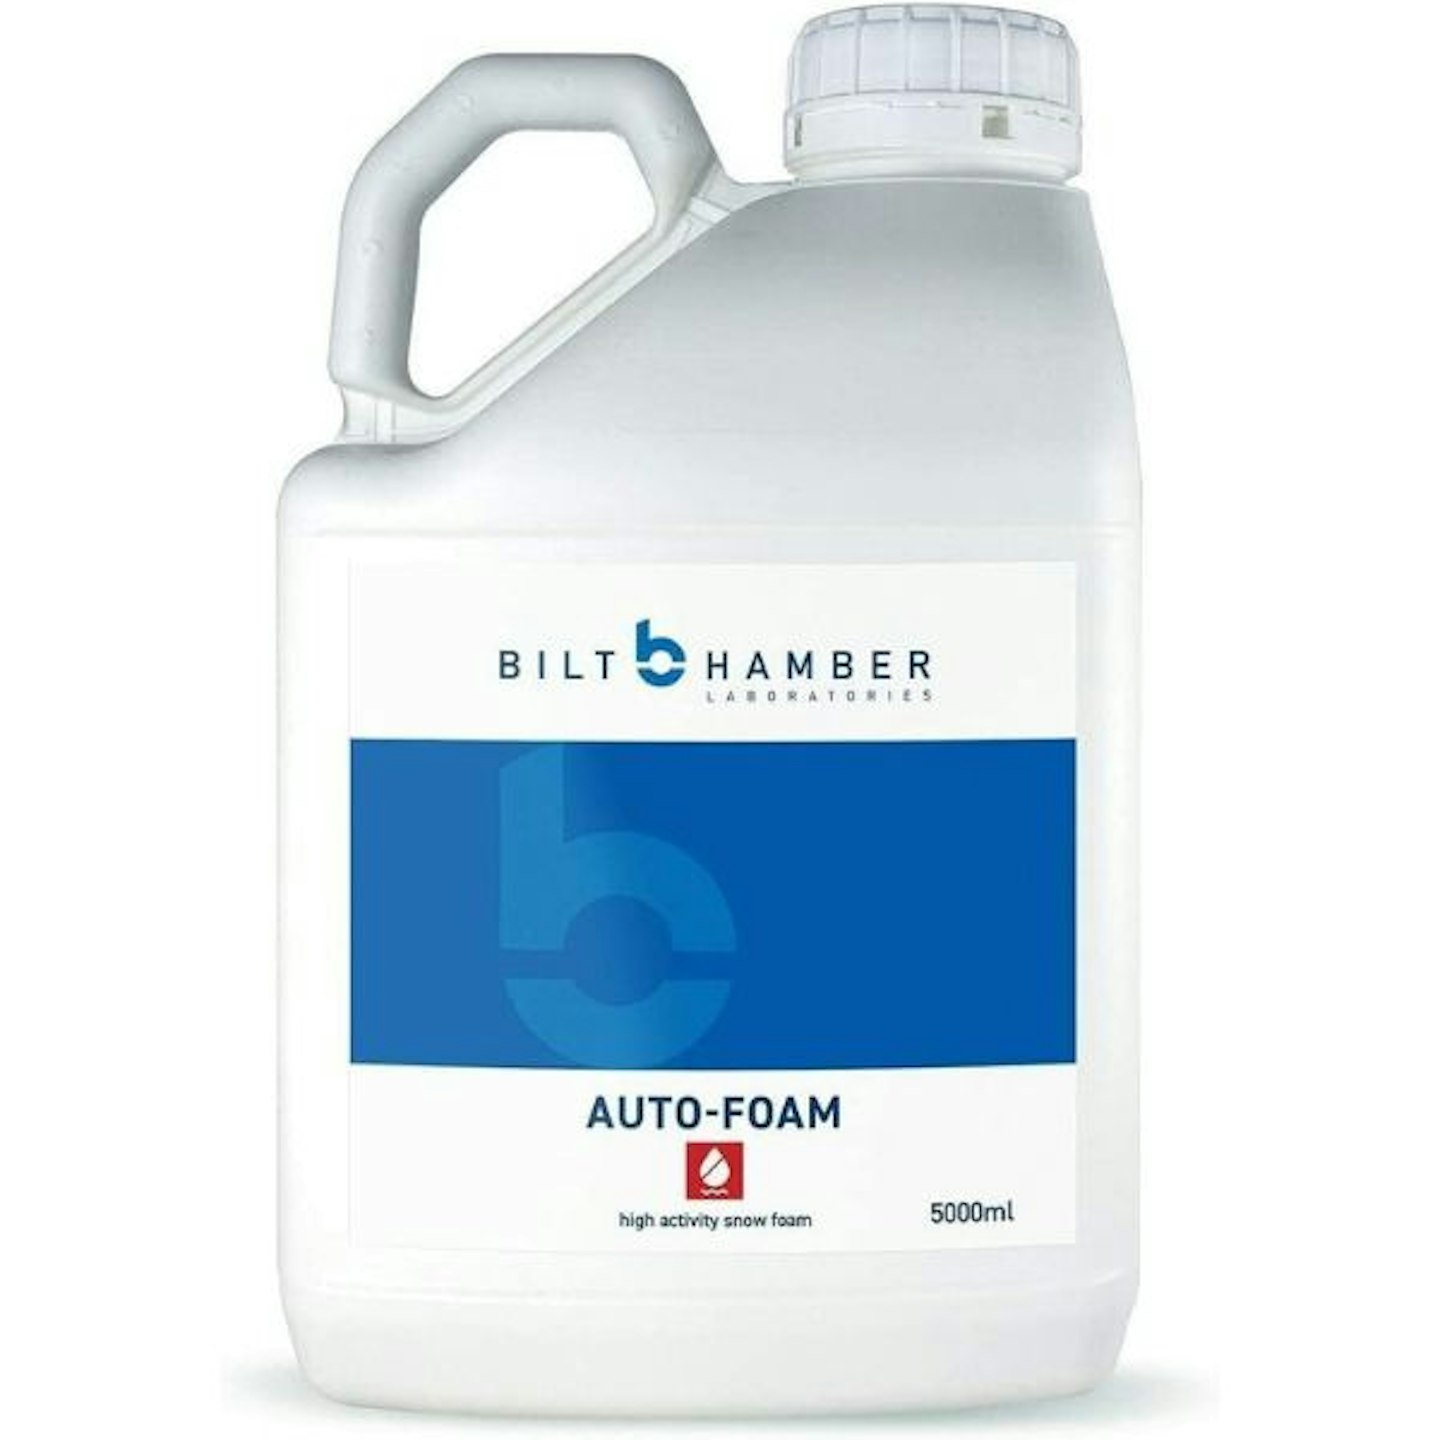 Autoglym - Extra Gloss Protection 500ml - Carchemicals